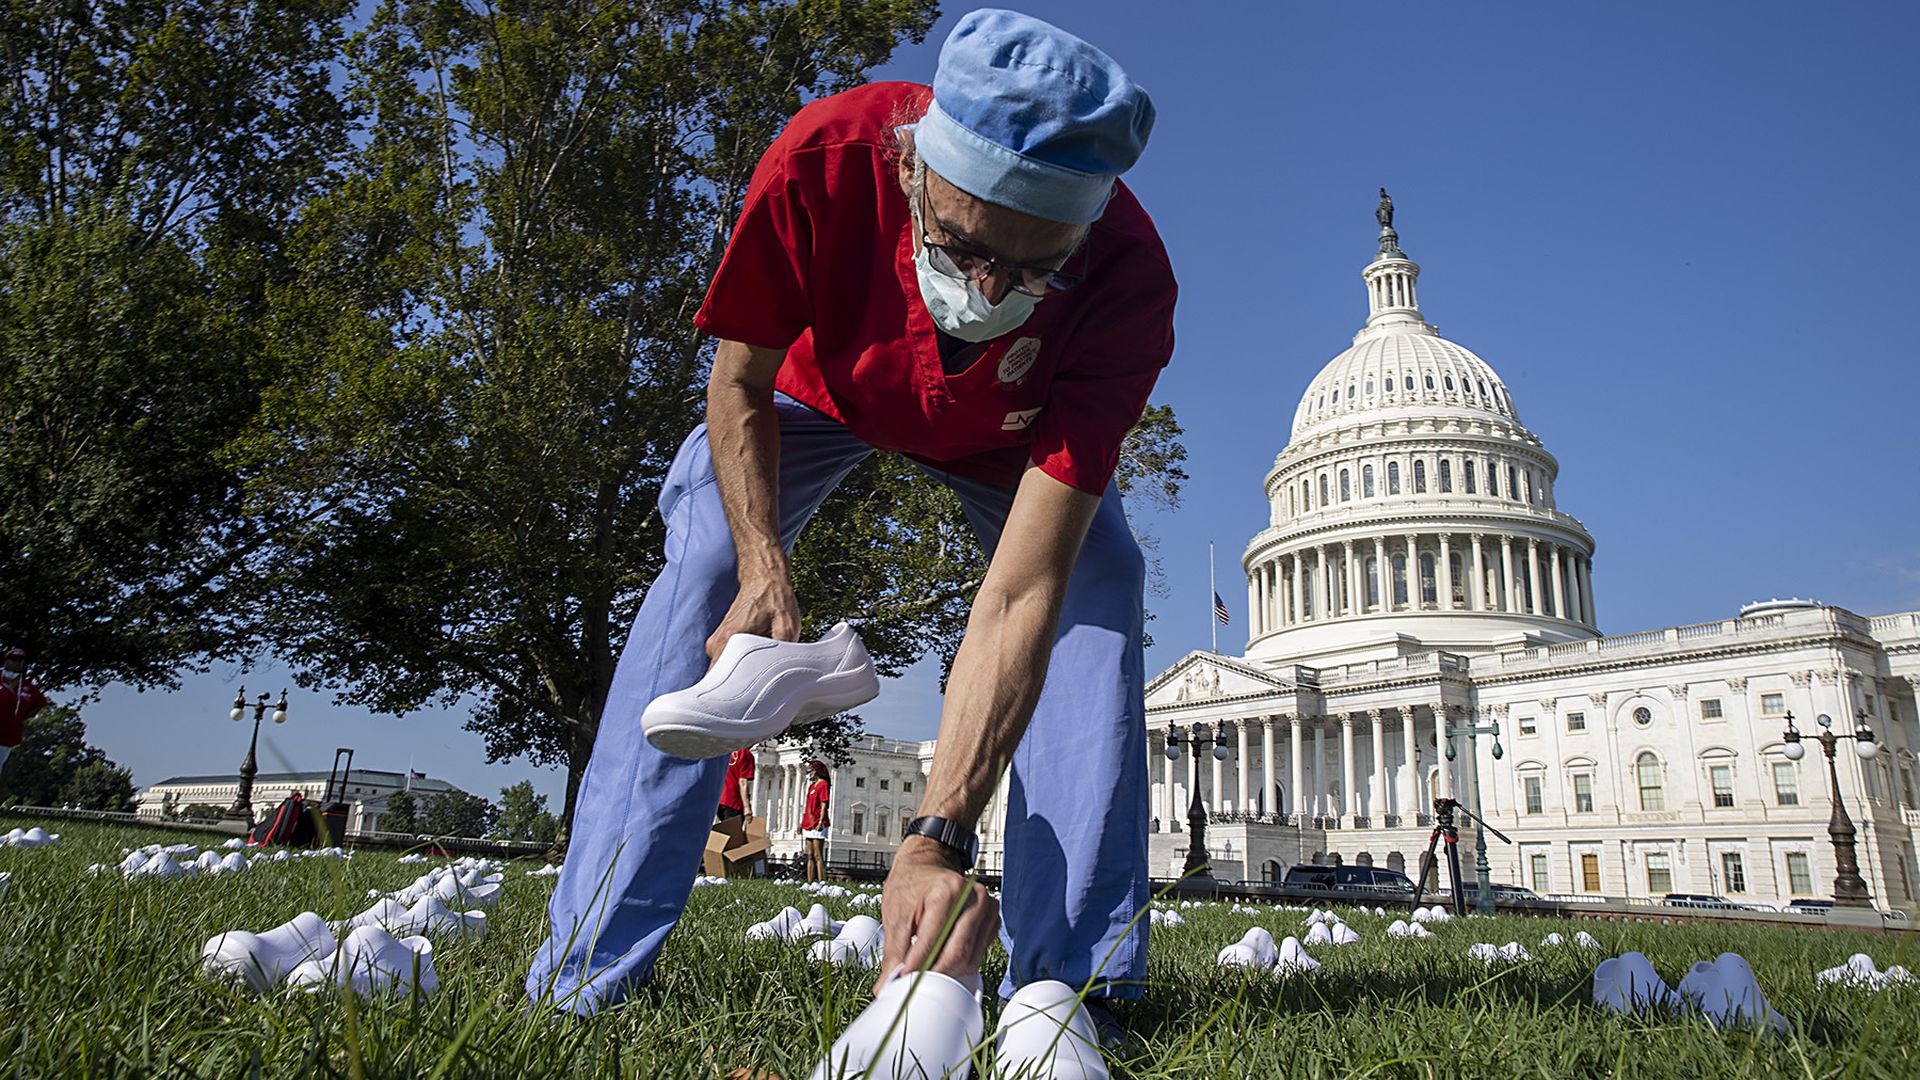  Scott Weinstein, Nurse at Washington Hospital places nurses shoes during a Vigil For Nurses Who've Died From Covid-19 at the U.S. Capital on July 21